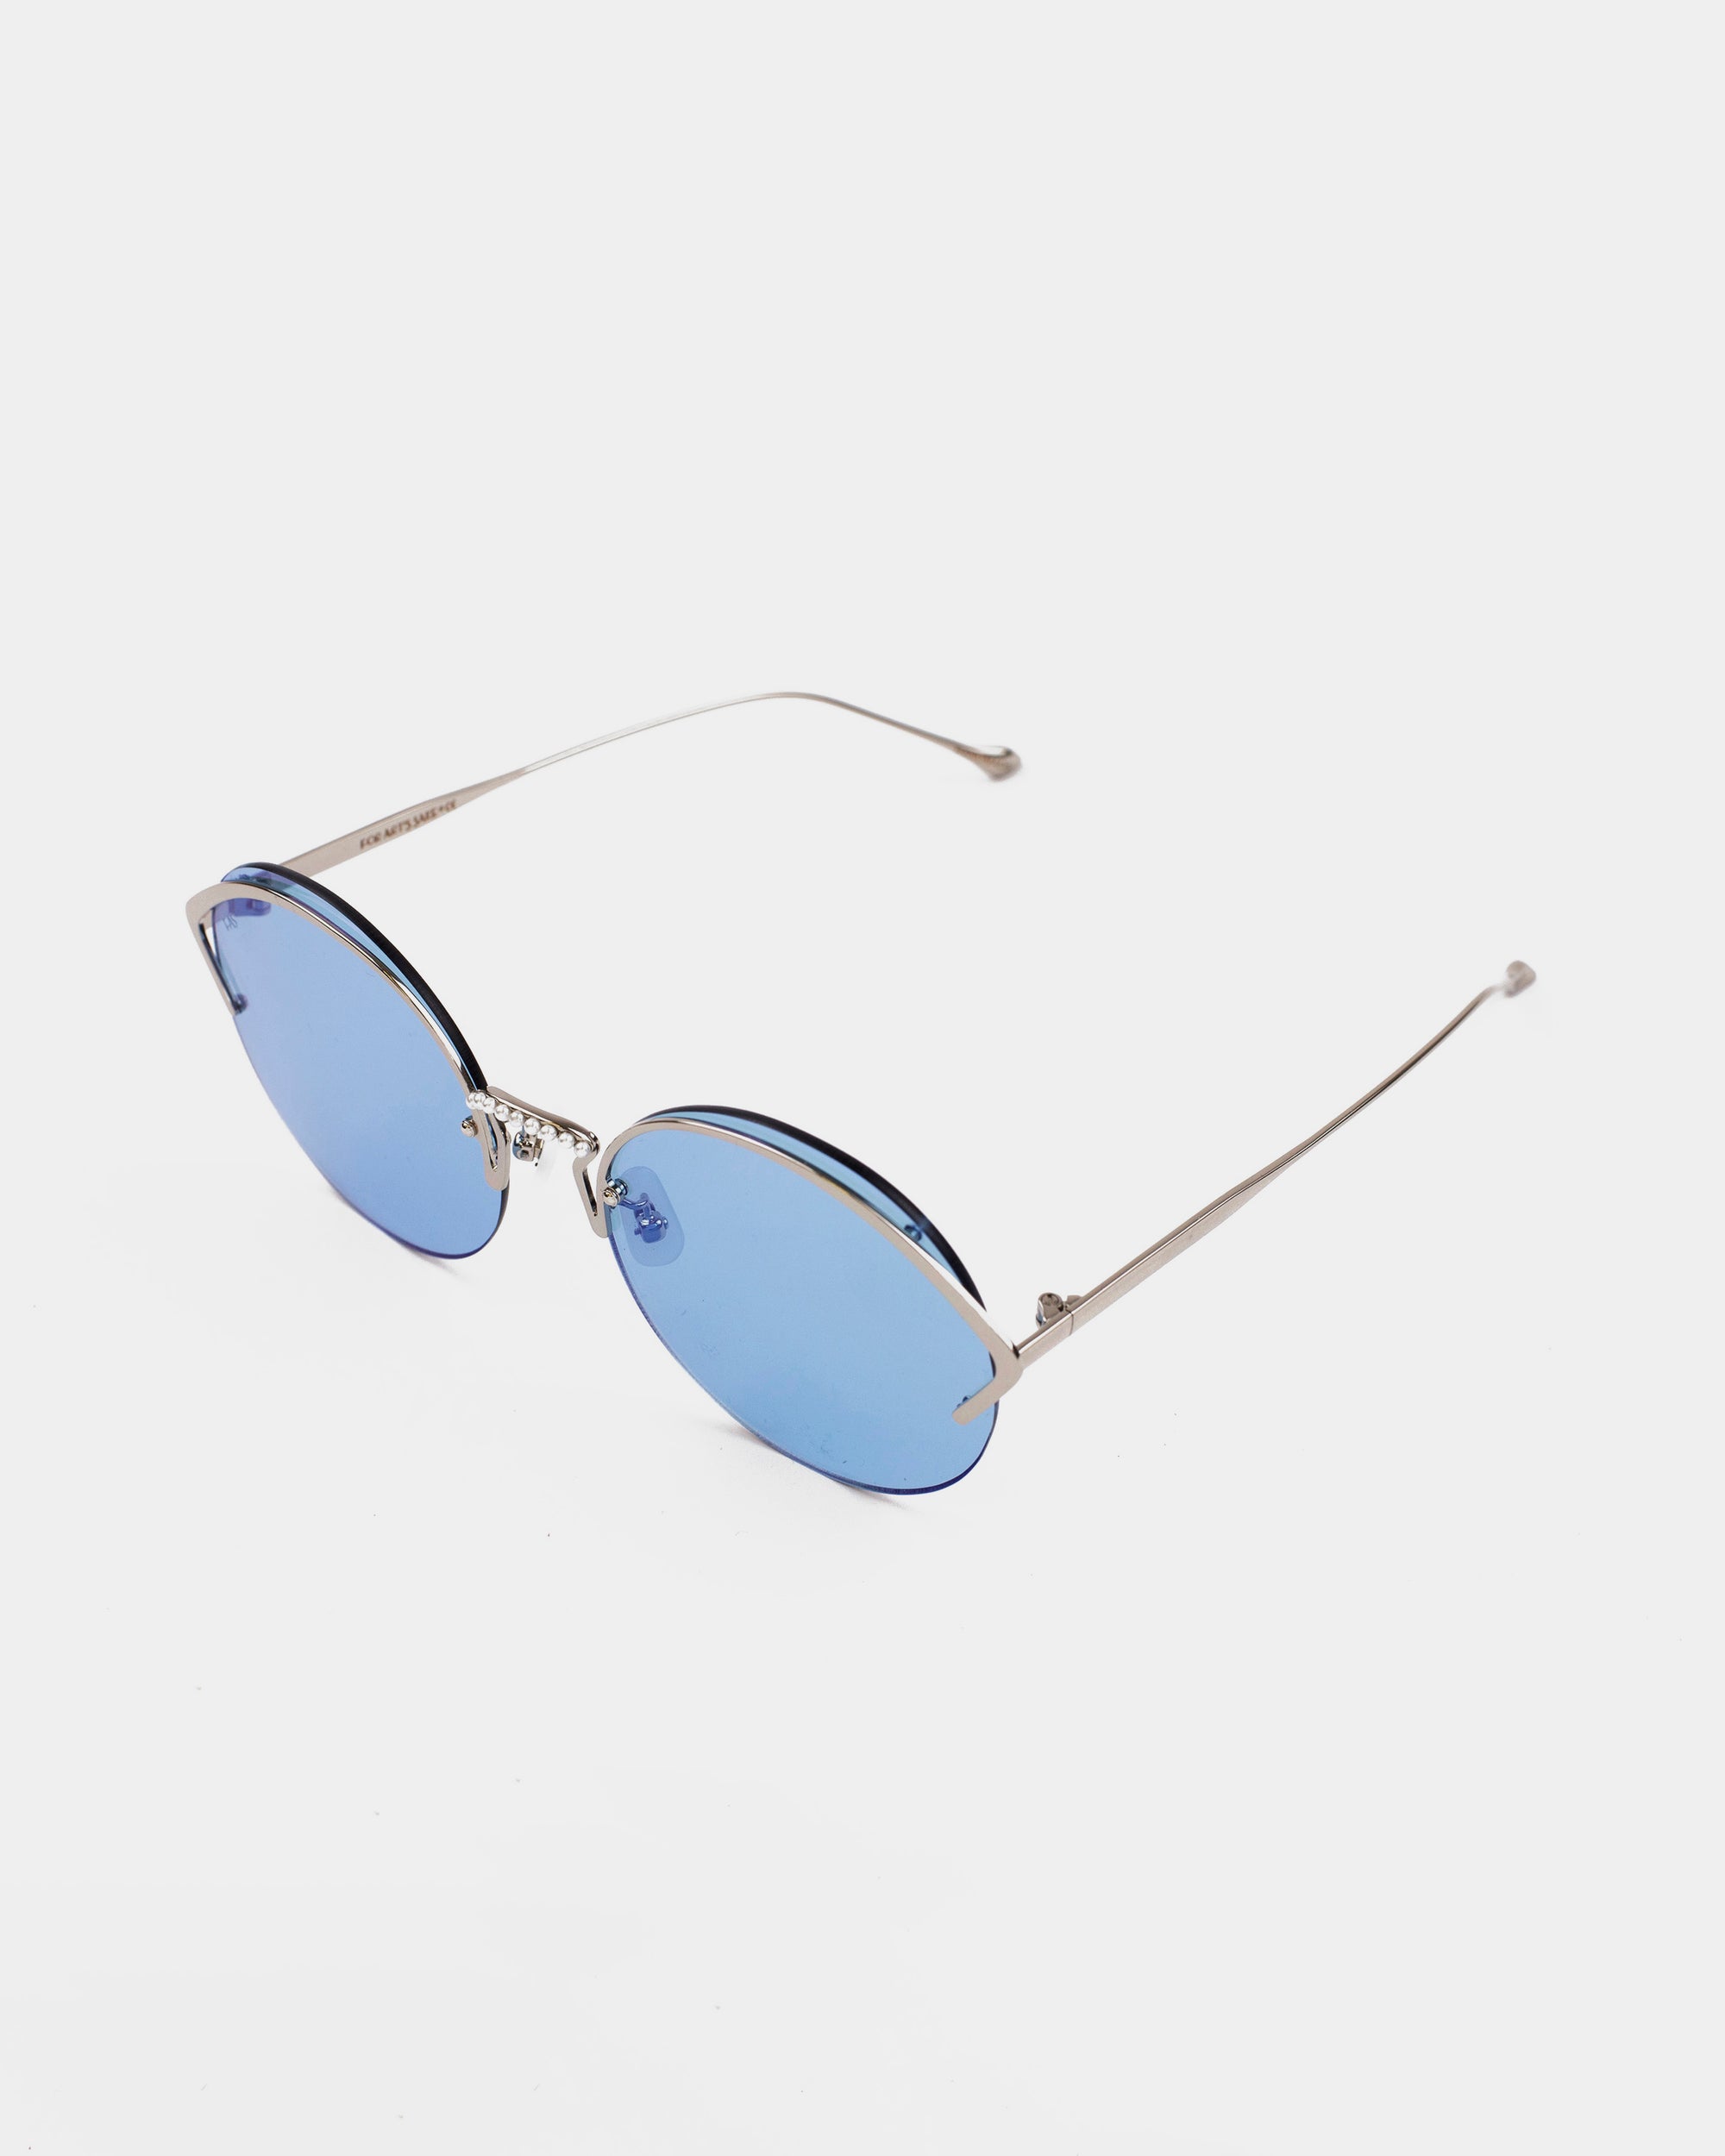 A pair of For Art&#39;s Sake® Margarita sunglasses with blue-tinted nylon lenses and thin stainless steel frames and arms, boasting UV protection, set against a plain white background.